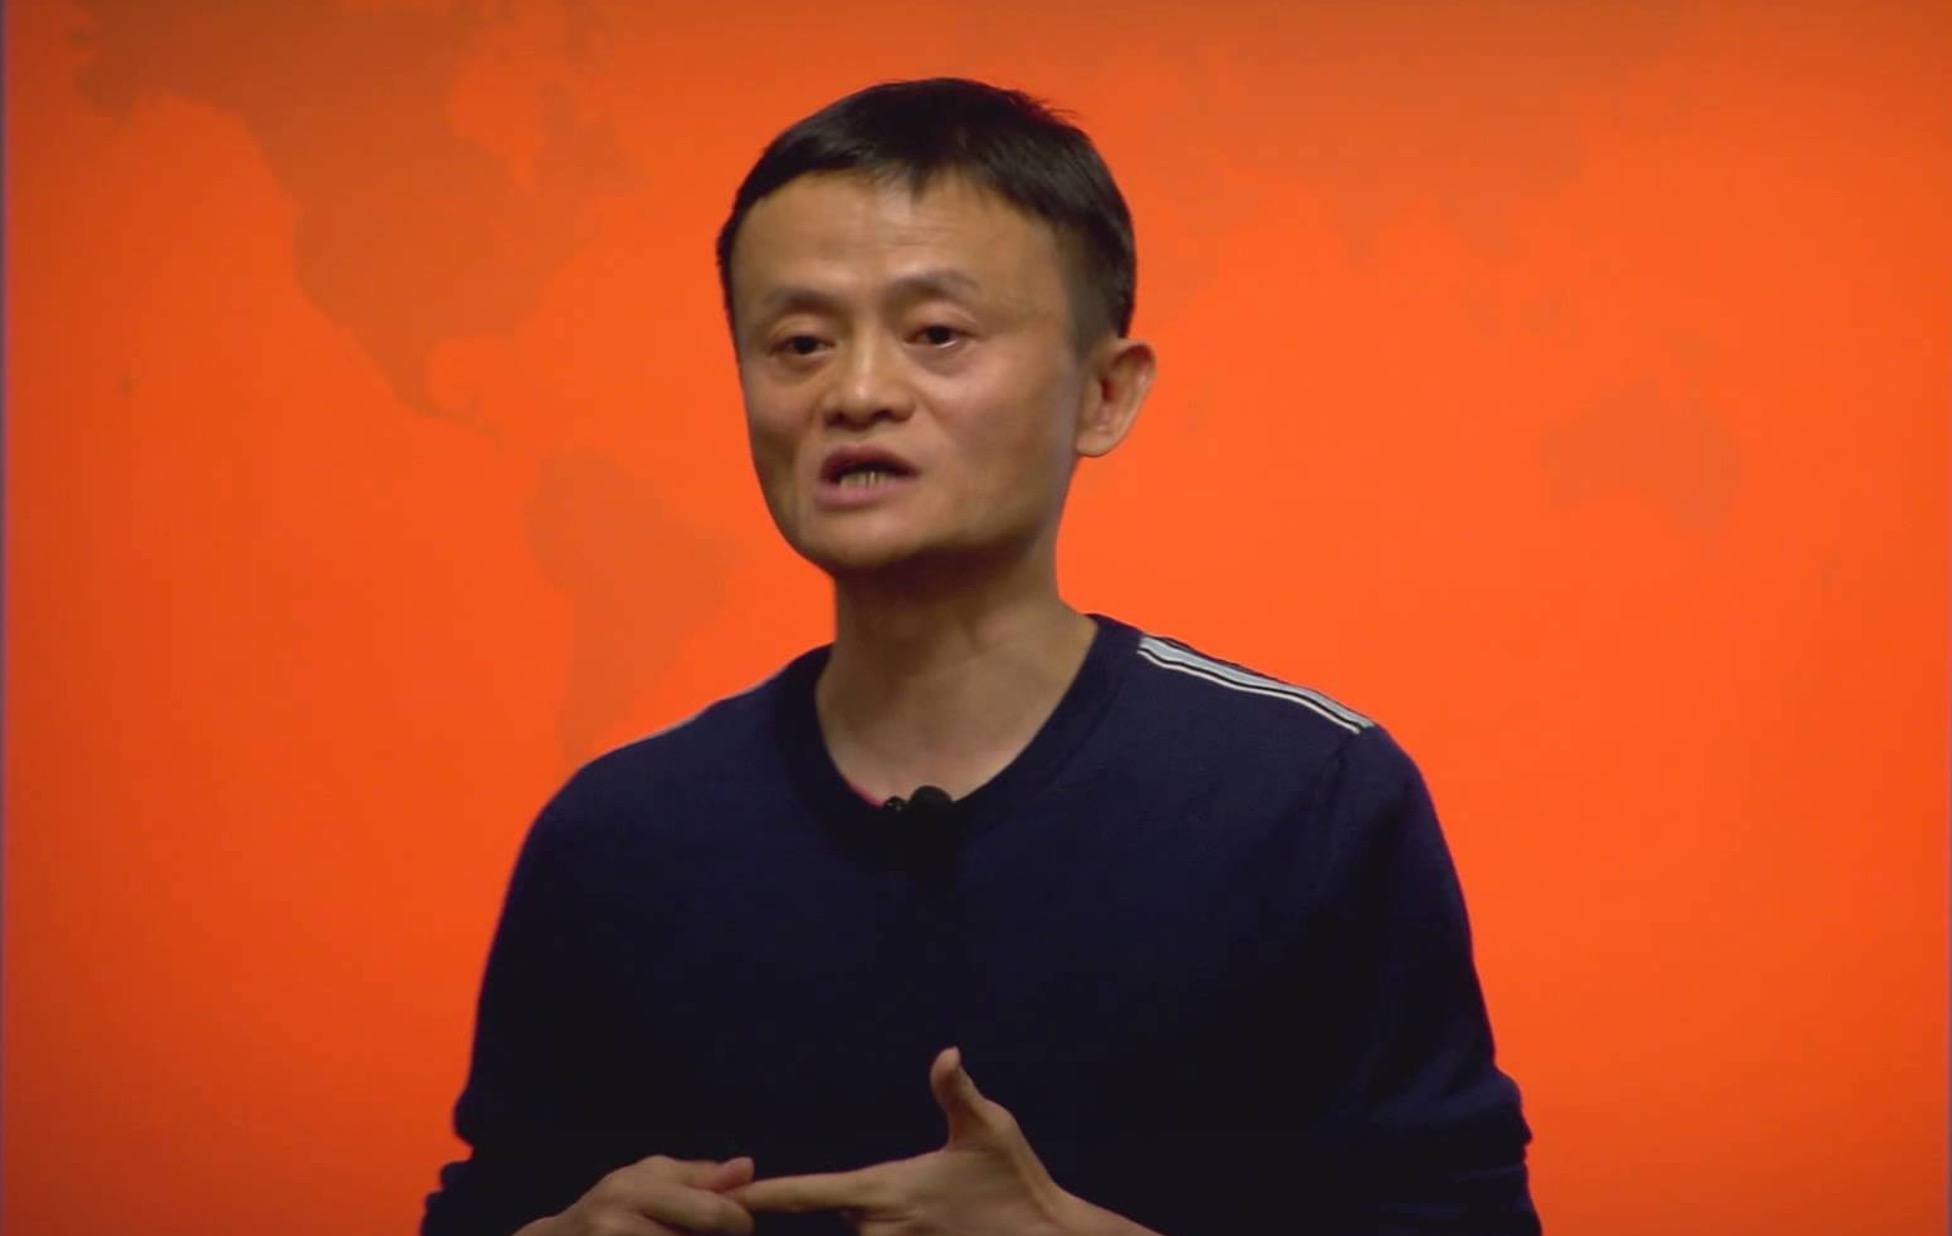 Alibaba founder Jack Ma. PHOTO: Screengrab from Alibaba.com’s Youtube channel